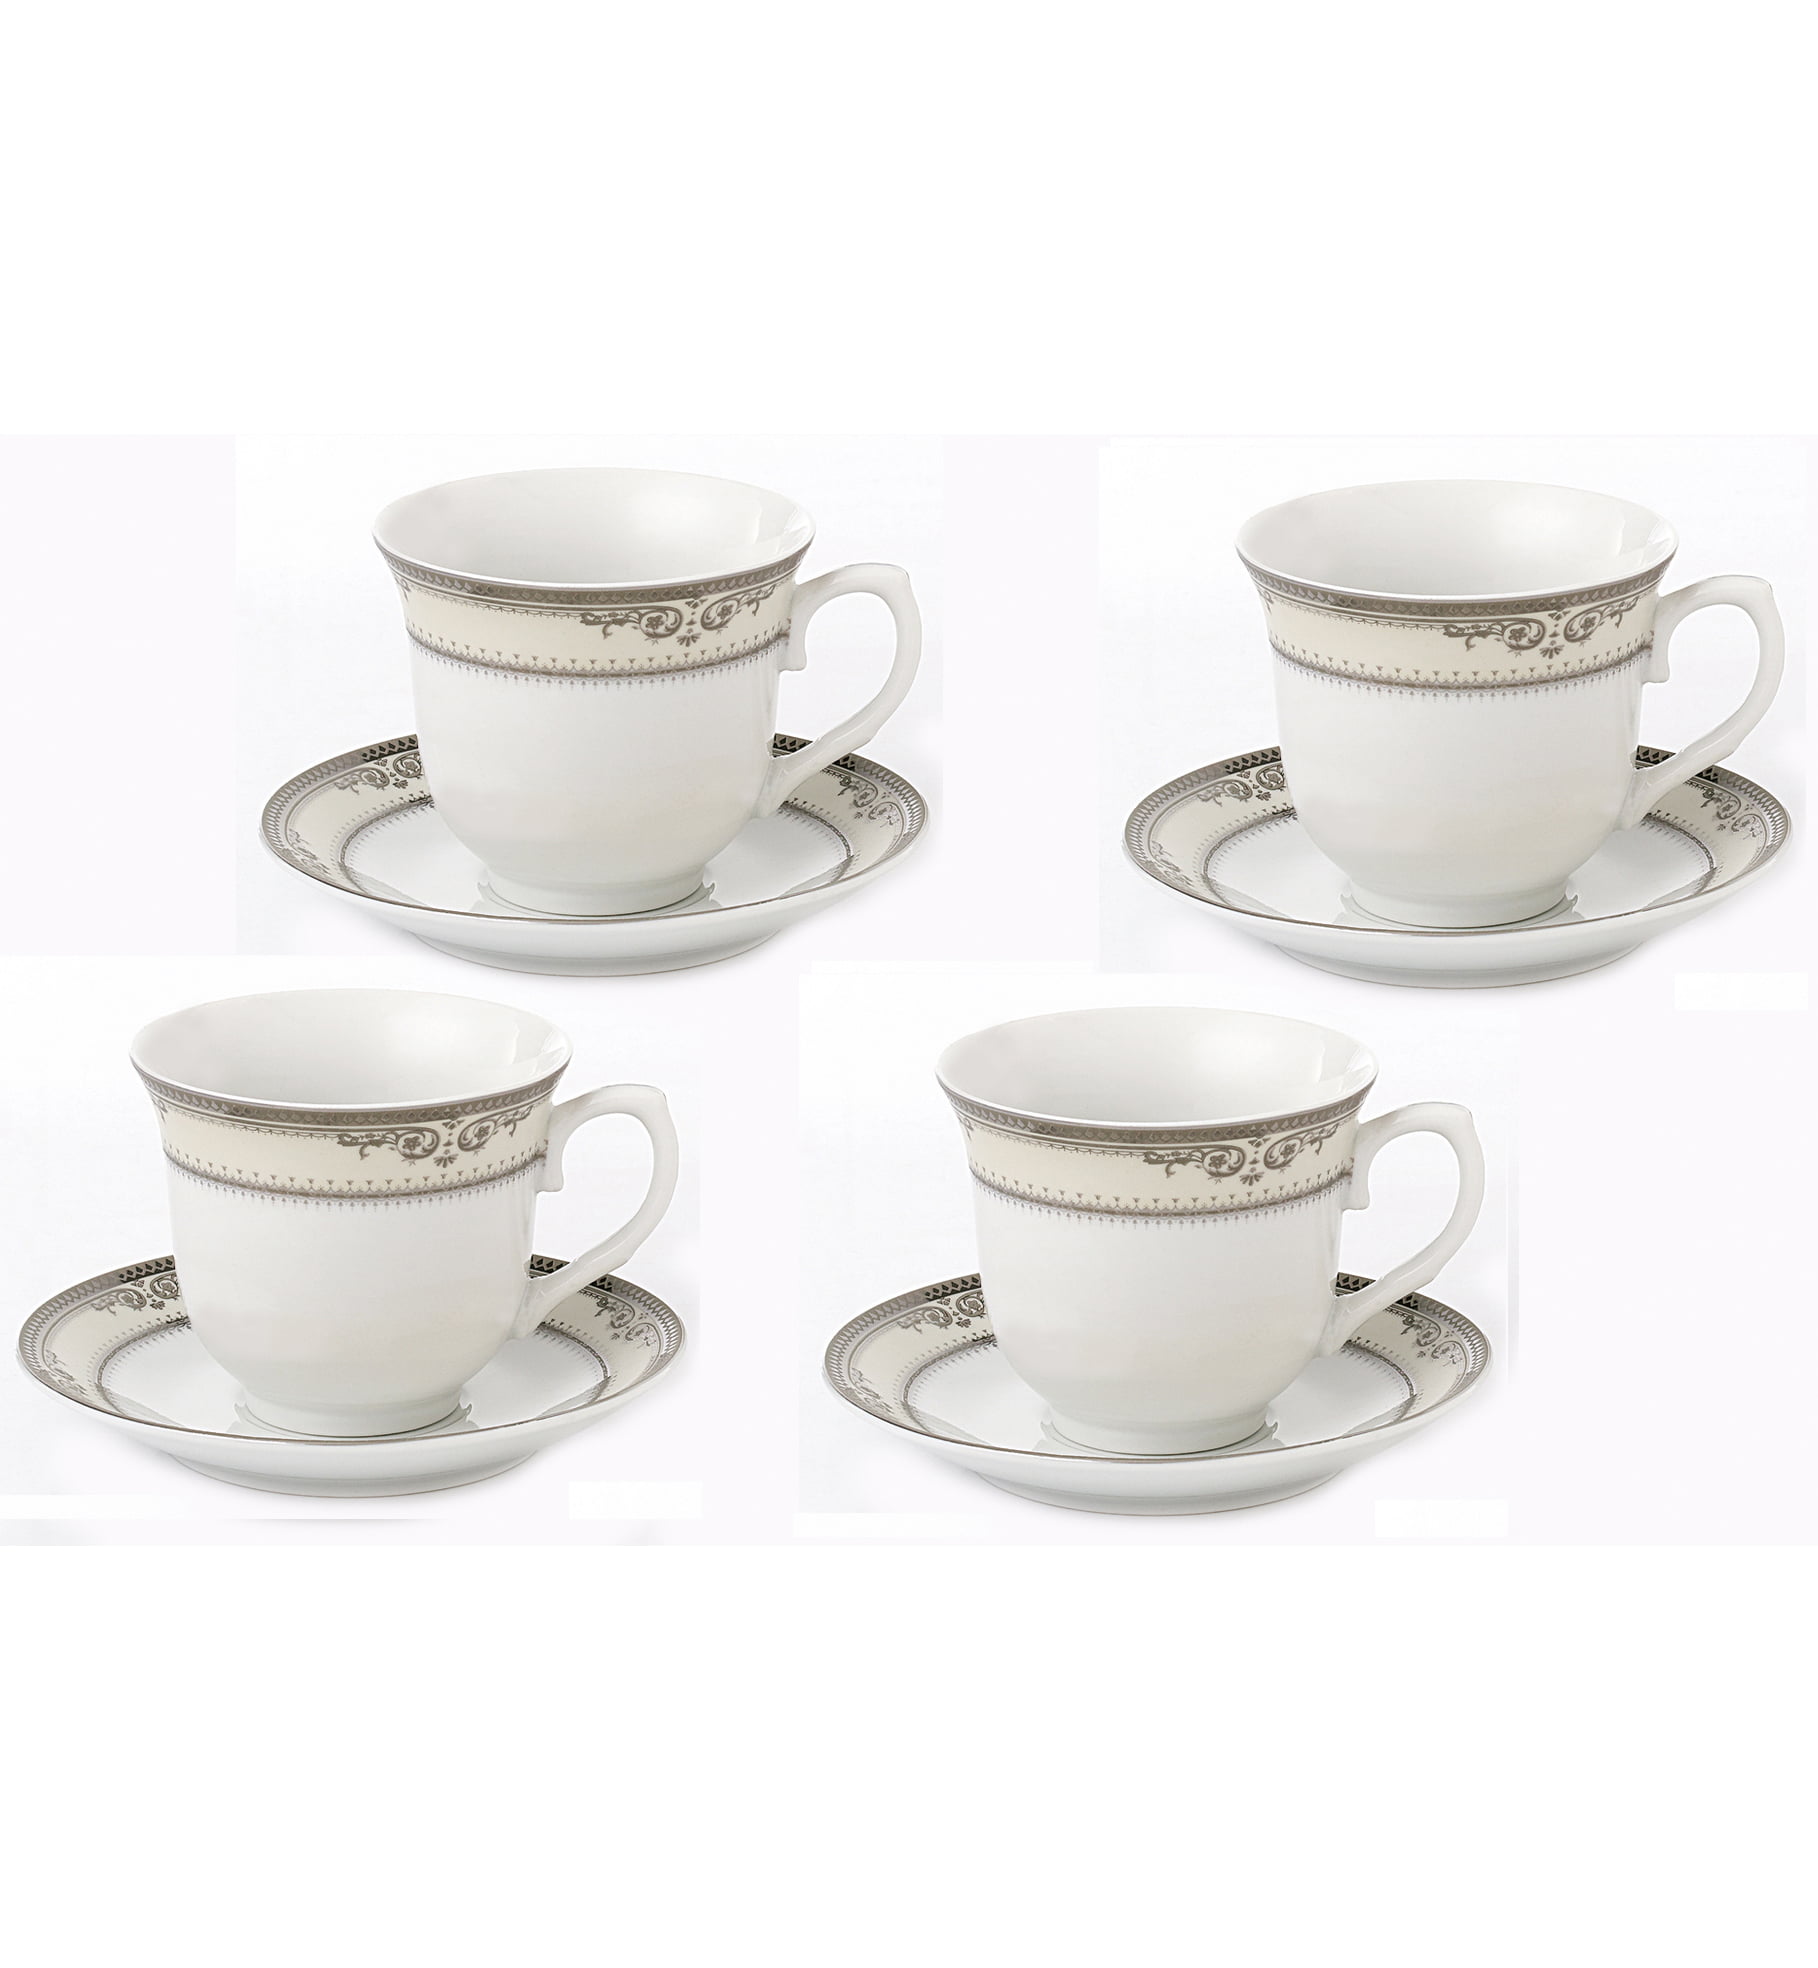 ARRADENS Tea Cups and Saucers, 7.5 OZ Large Espresso Cups Set of 4,  Porcelain Coffee Cup and Saucer,…See more ARRADENS Tea Cups and Saucers,  7.5 OZ